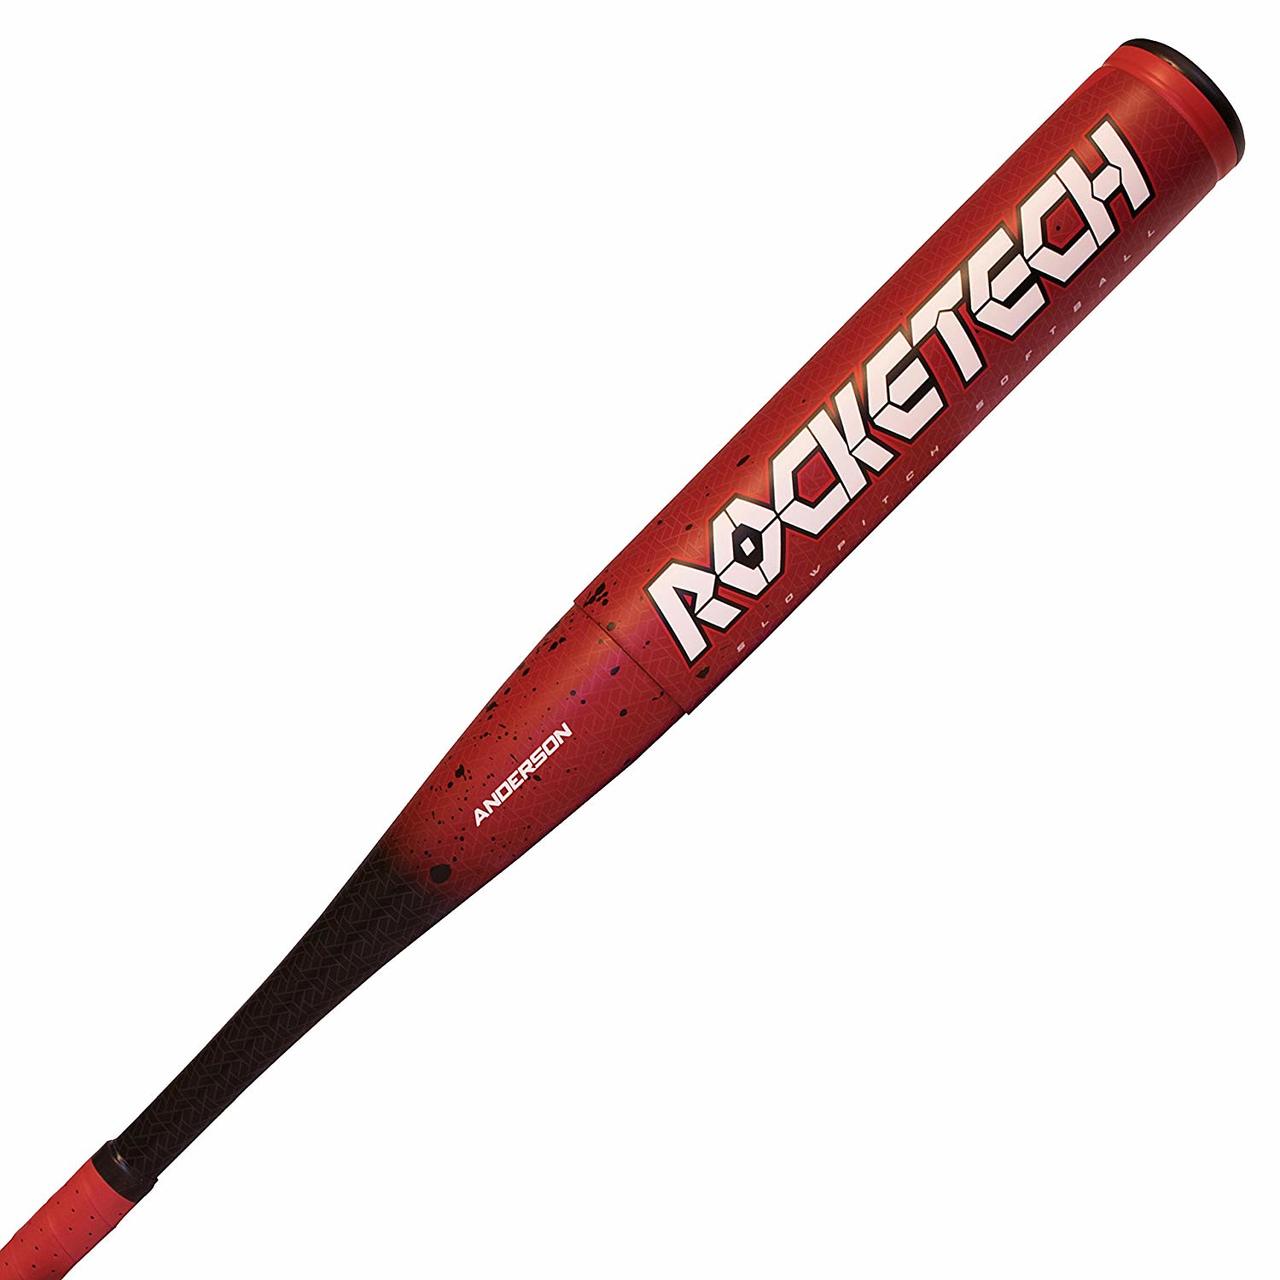 2 ¼” Barrel Ultra-Thin whip handle for better bat speed End loaded swing weight for more POWER, guaranteed! Approved By All Major Softball Associations Including: ASA, USSSA, NSA, & ISA Manufacture Warranty: 1 year against manufacture defects